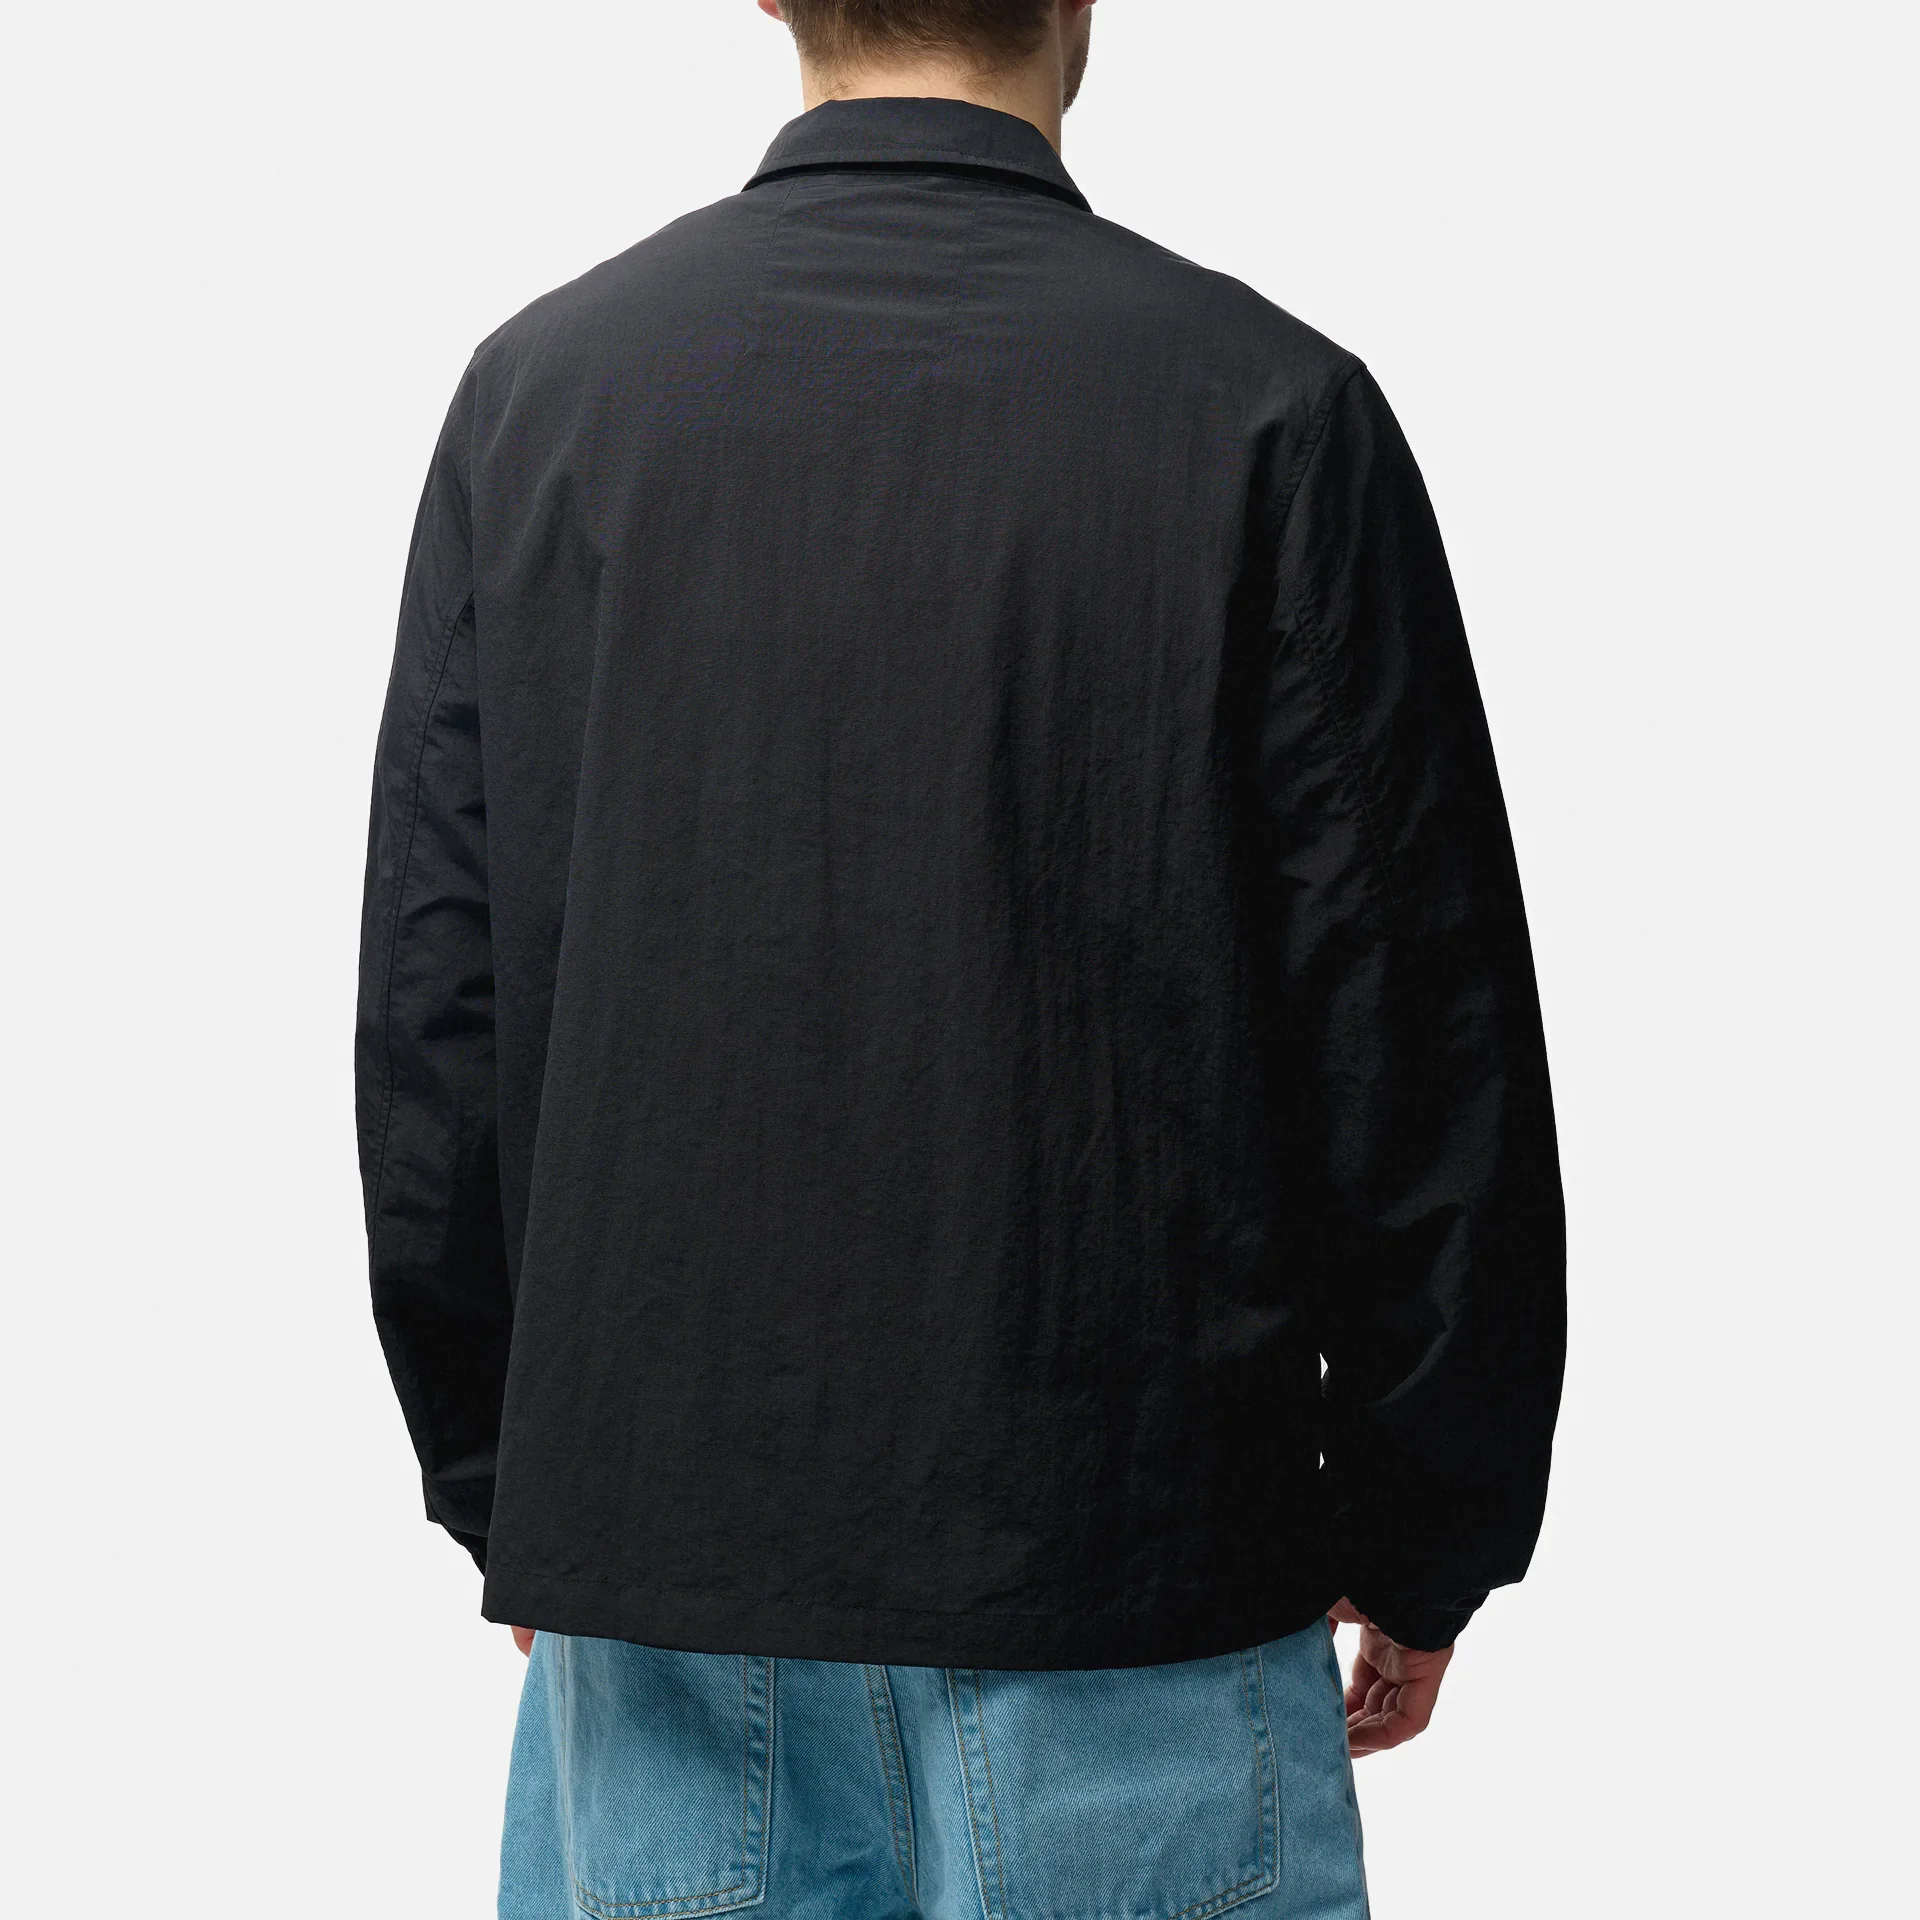 Fred Perry Ripstop Overshirt Black